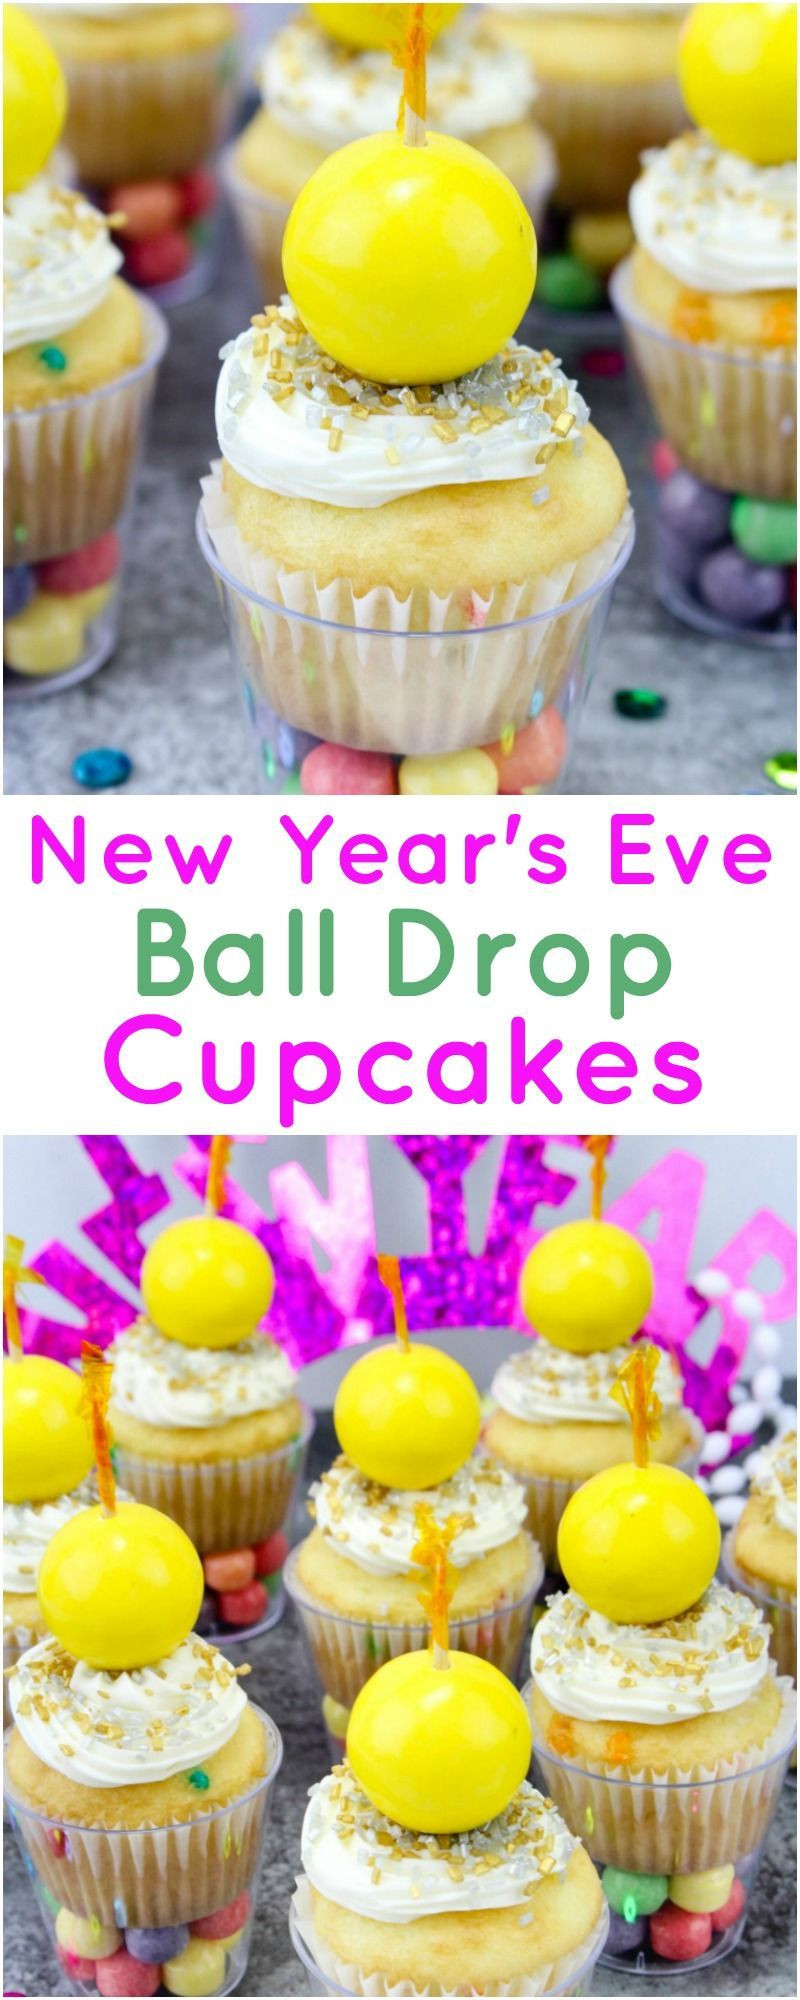 Best New Year'S Eve Desserts
 New Year s Eve Ball Drop Cupcakes